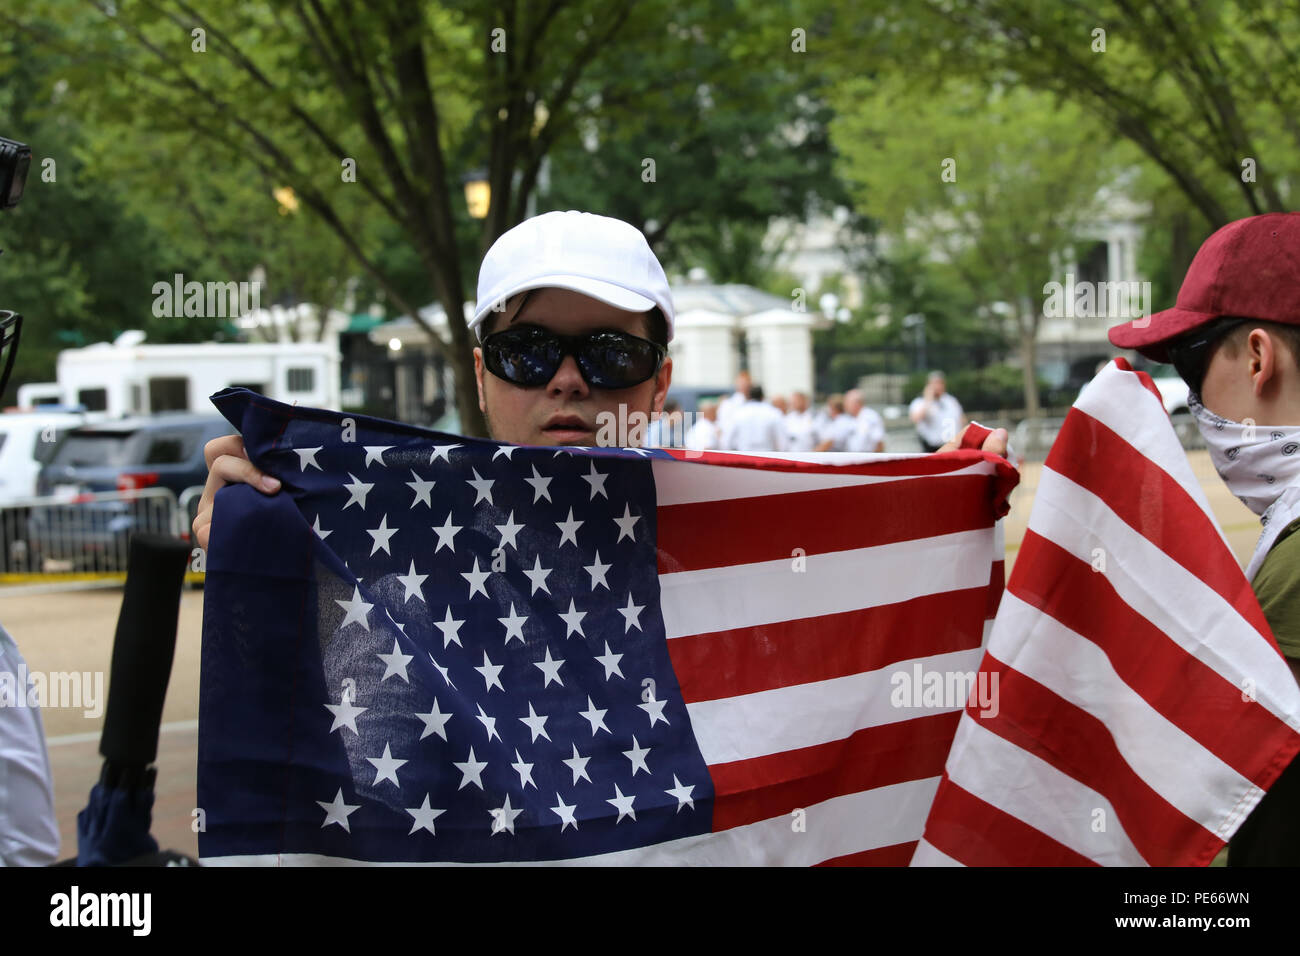 Washington, DC, USA. 12 Aug 2018. White nationalist protestors at the Unite the Right protest in front of the White House hold flags. Credit: Joseph Gruber/Alamy Live News Stock Photo